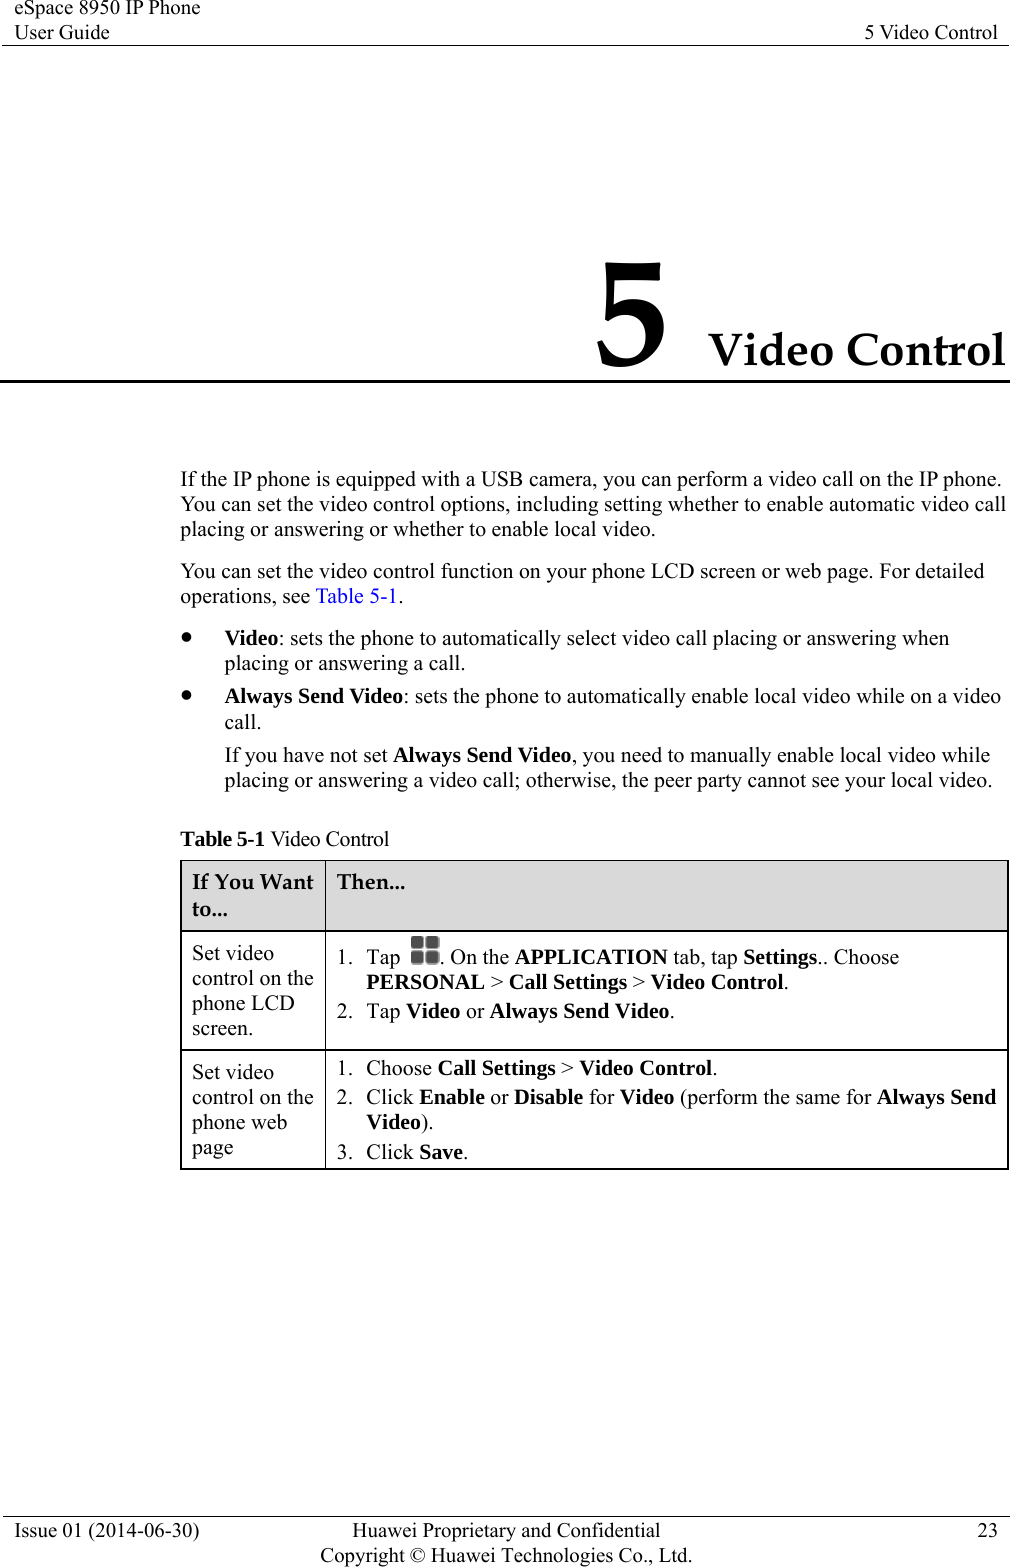 eSpace 8950 IP Phone User Guide  5 Video Control Issue 01 (2014-06-30)  Huawei Proprietary and Confidential         Copyright © Huawei Technologies Co., Ltd.23 5 Video Control If the IP phone is equipped with a USB camera, you can perform a video call on the IP phone. You can set the video control options, including setting whether to enable automatic video call placing or answering or whether to enable local video.   You can set the video control function on your phone LCD screen or web page. For detailed operations, see Table 5-1.  Video: sets the phone to automatically select video call placing or answering when placing or answering a call.  Always Send Video: sets the phone to automatically enable local video while on a video call. If you have not set Always Send Video, you need to manually enable local video while placing or answering a video call; otherwise, the peer party cannot see your local video. Table 5-1 Video Control If You Want to... Then... Set video control on the phone LCD screen. 1. Tap  . On the APPLICATION tab, tap Settings.. Choose PERSONAL &gt; Call Settings &gt; Video Control. 2. Tap Video or Always Send Video. Set video control on the phone web page 1. Choose Call Settings &gt; Video Control. 2. Click Enable or Disable for Video (perform the same for Always Send Video). 3. Click Save.  